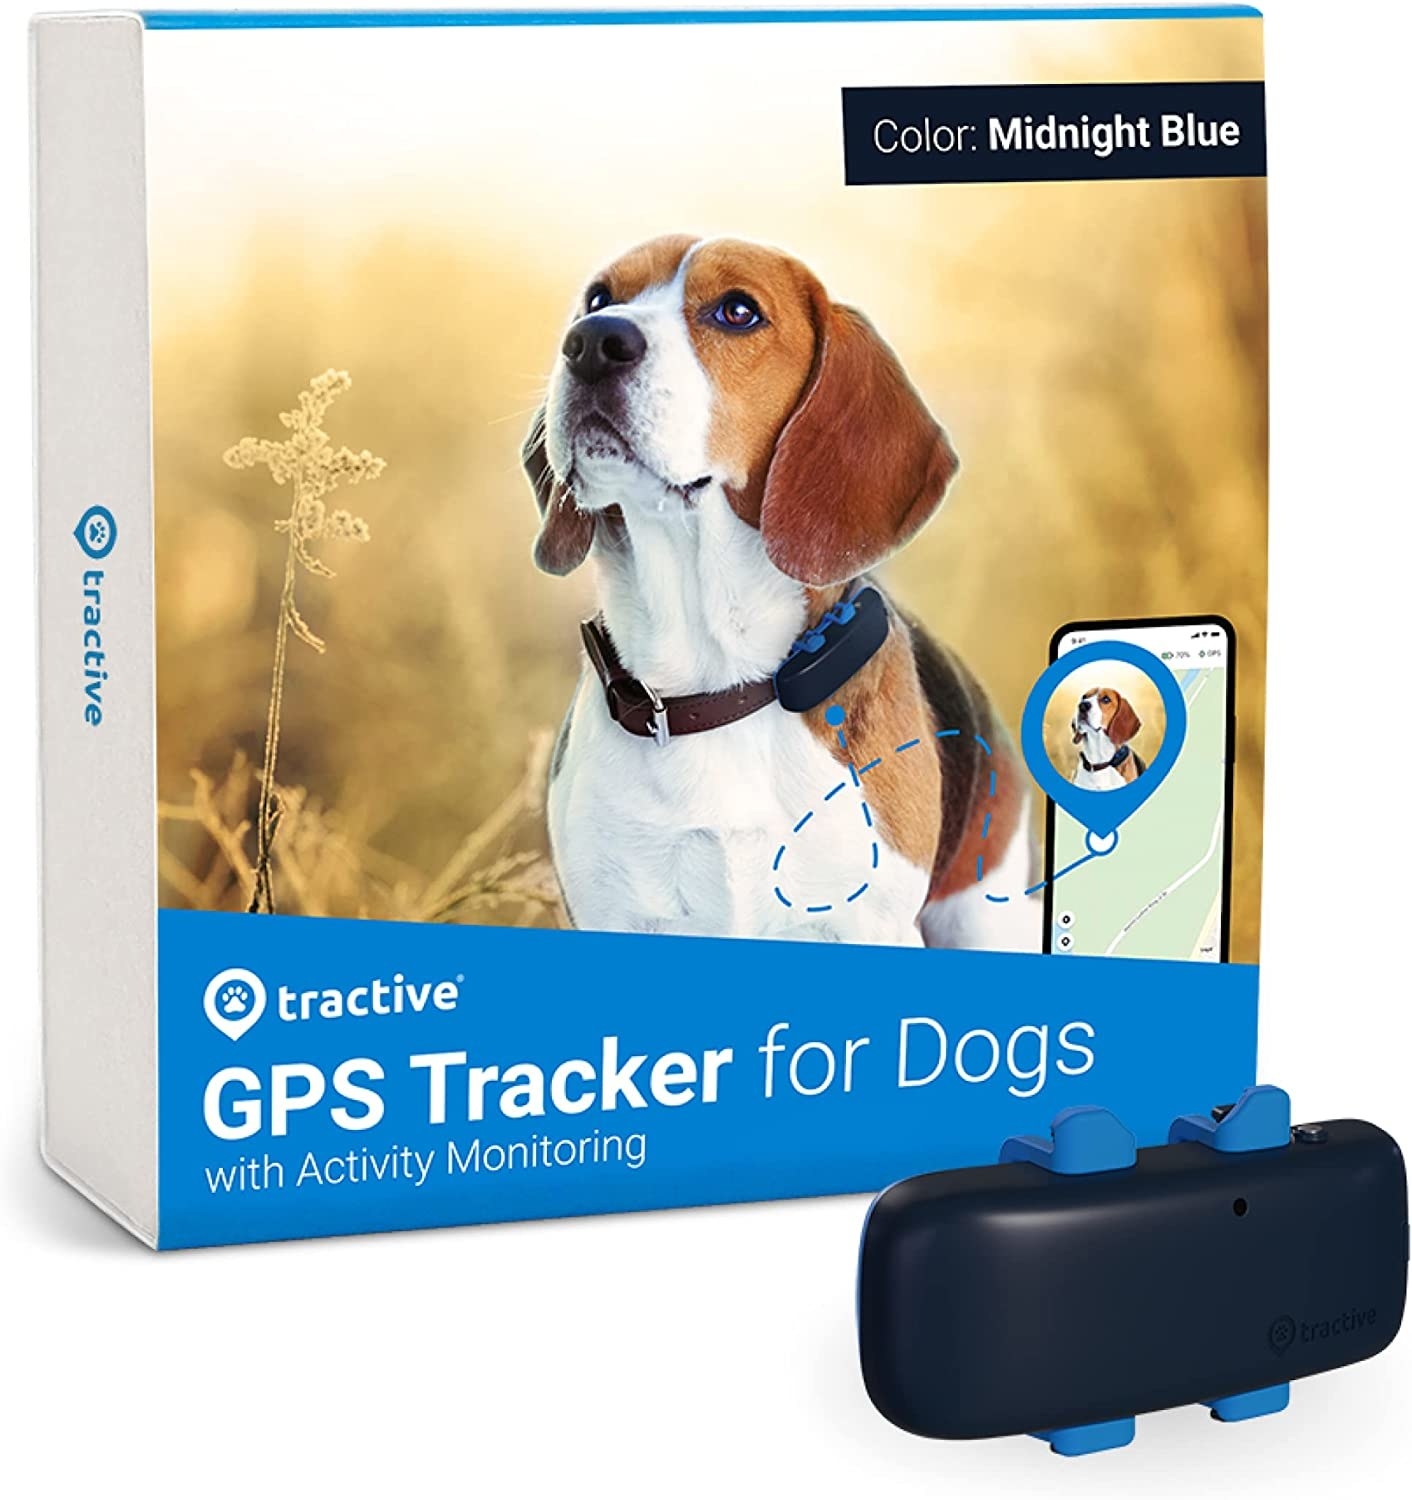 the tracker in front of the box against a plain background